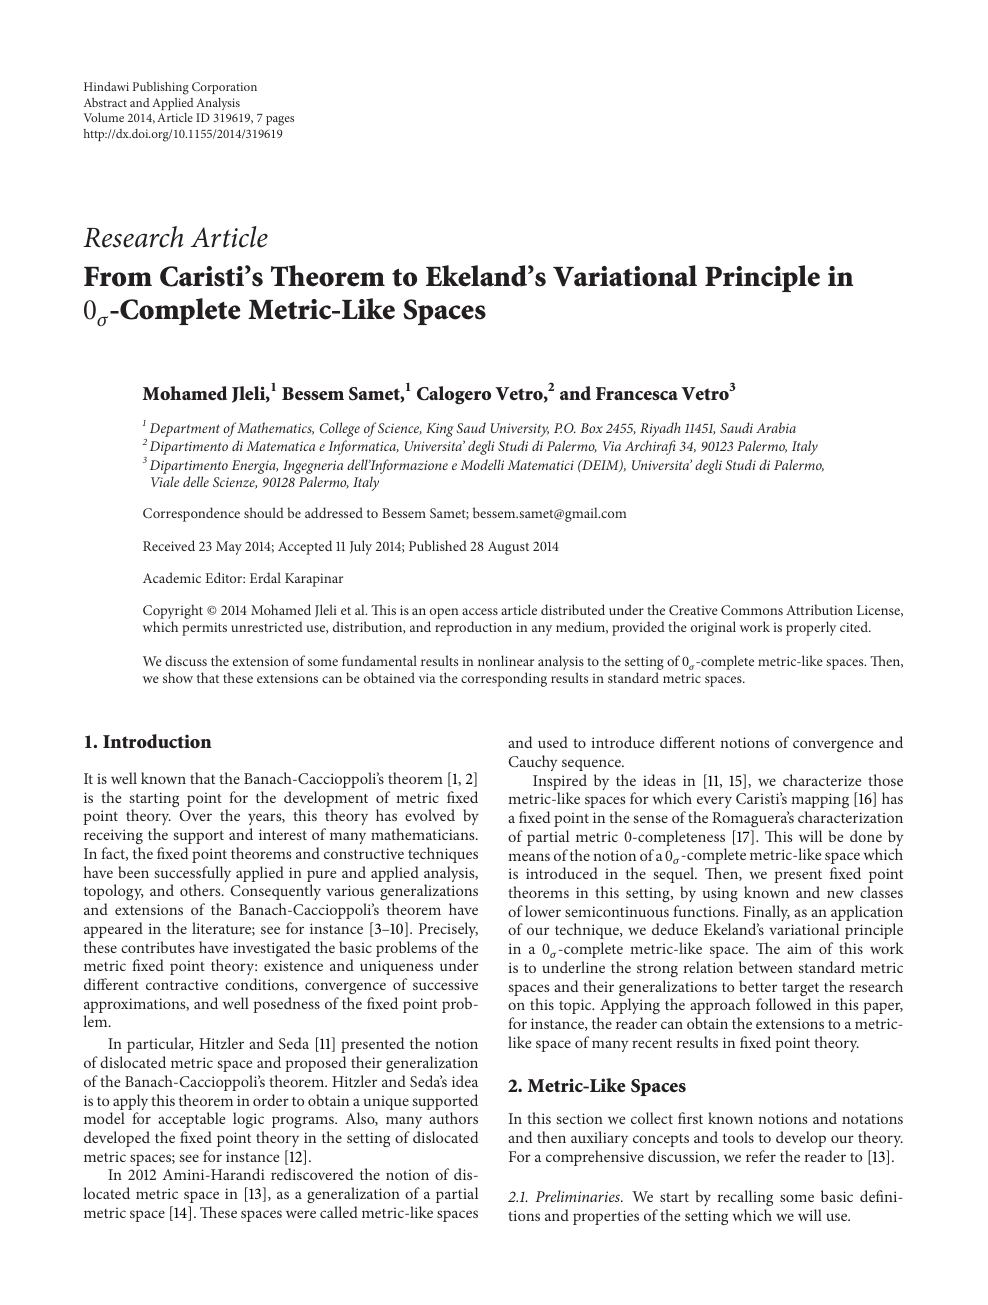 From Caristi S Theorem To Ekeland S Variational Principle In 0 S Complete Metric Like Spaces Topic Of Research Paper In Mathematics Download Scholarly Article Pdf And Read For Free On Cyberleninka Open Science